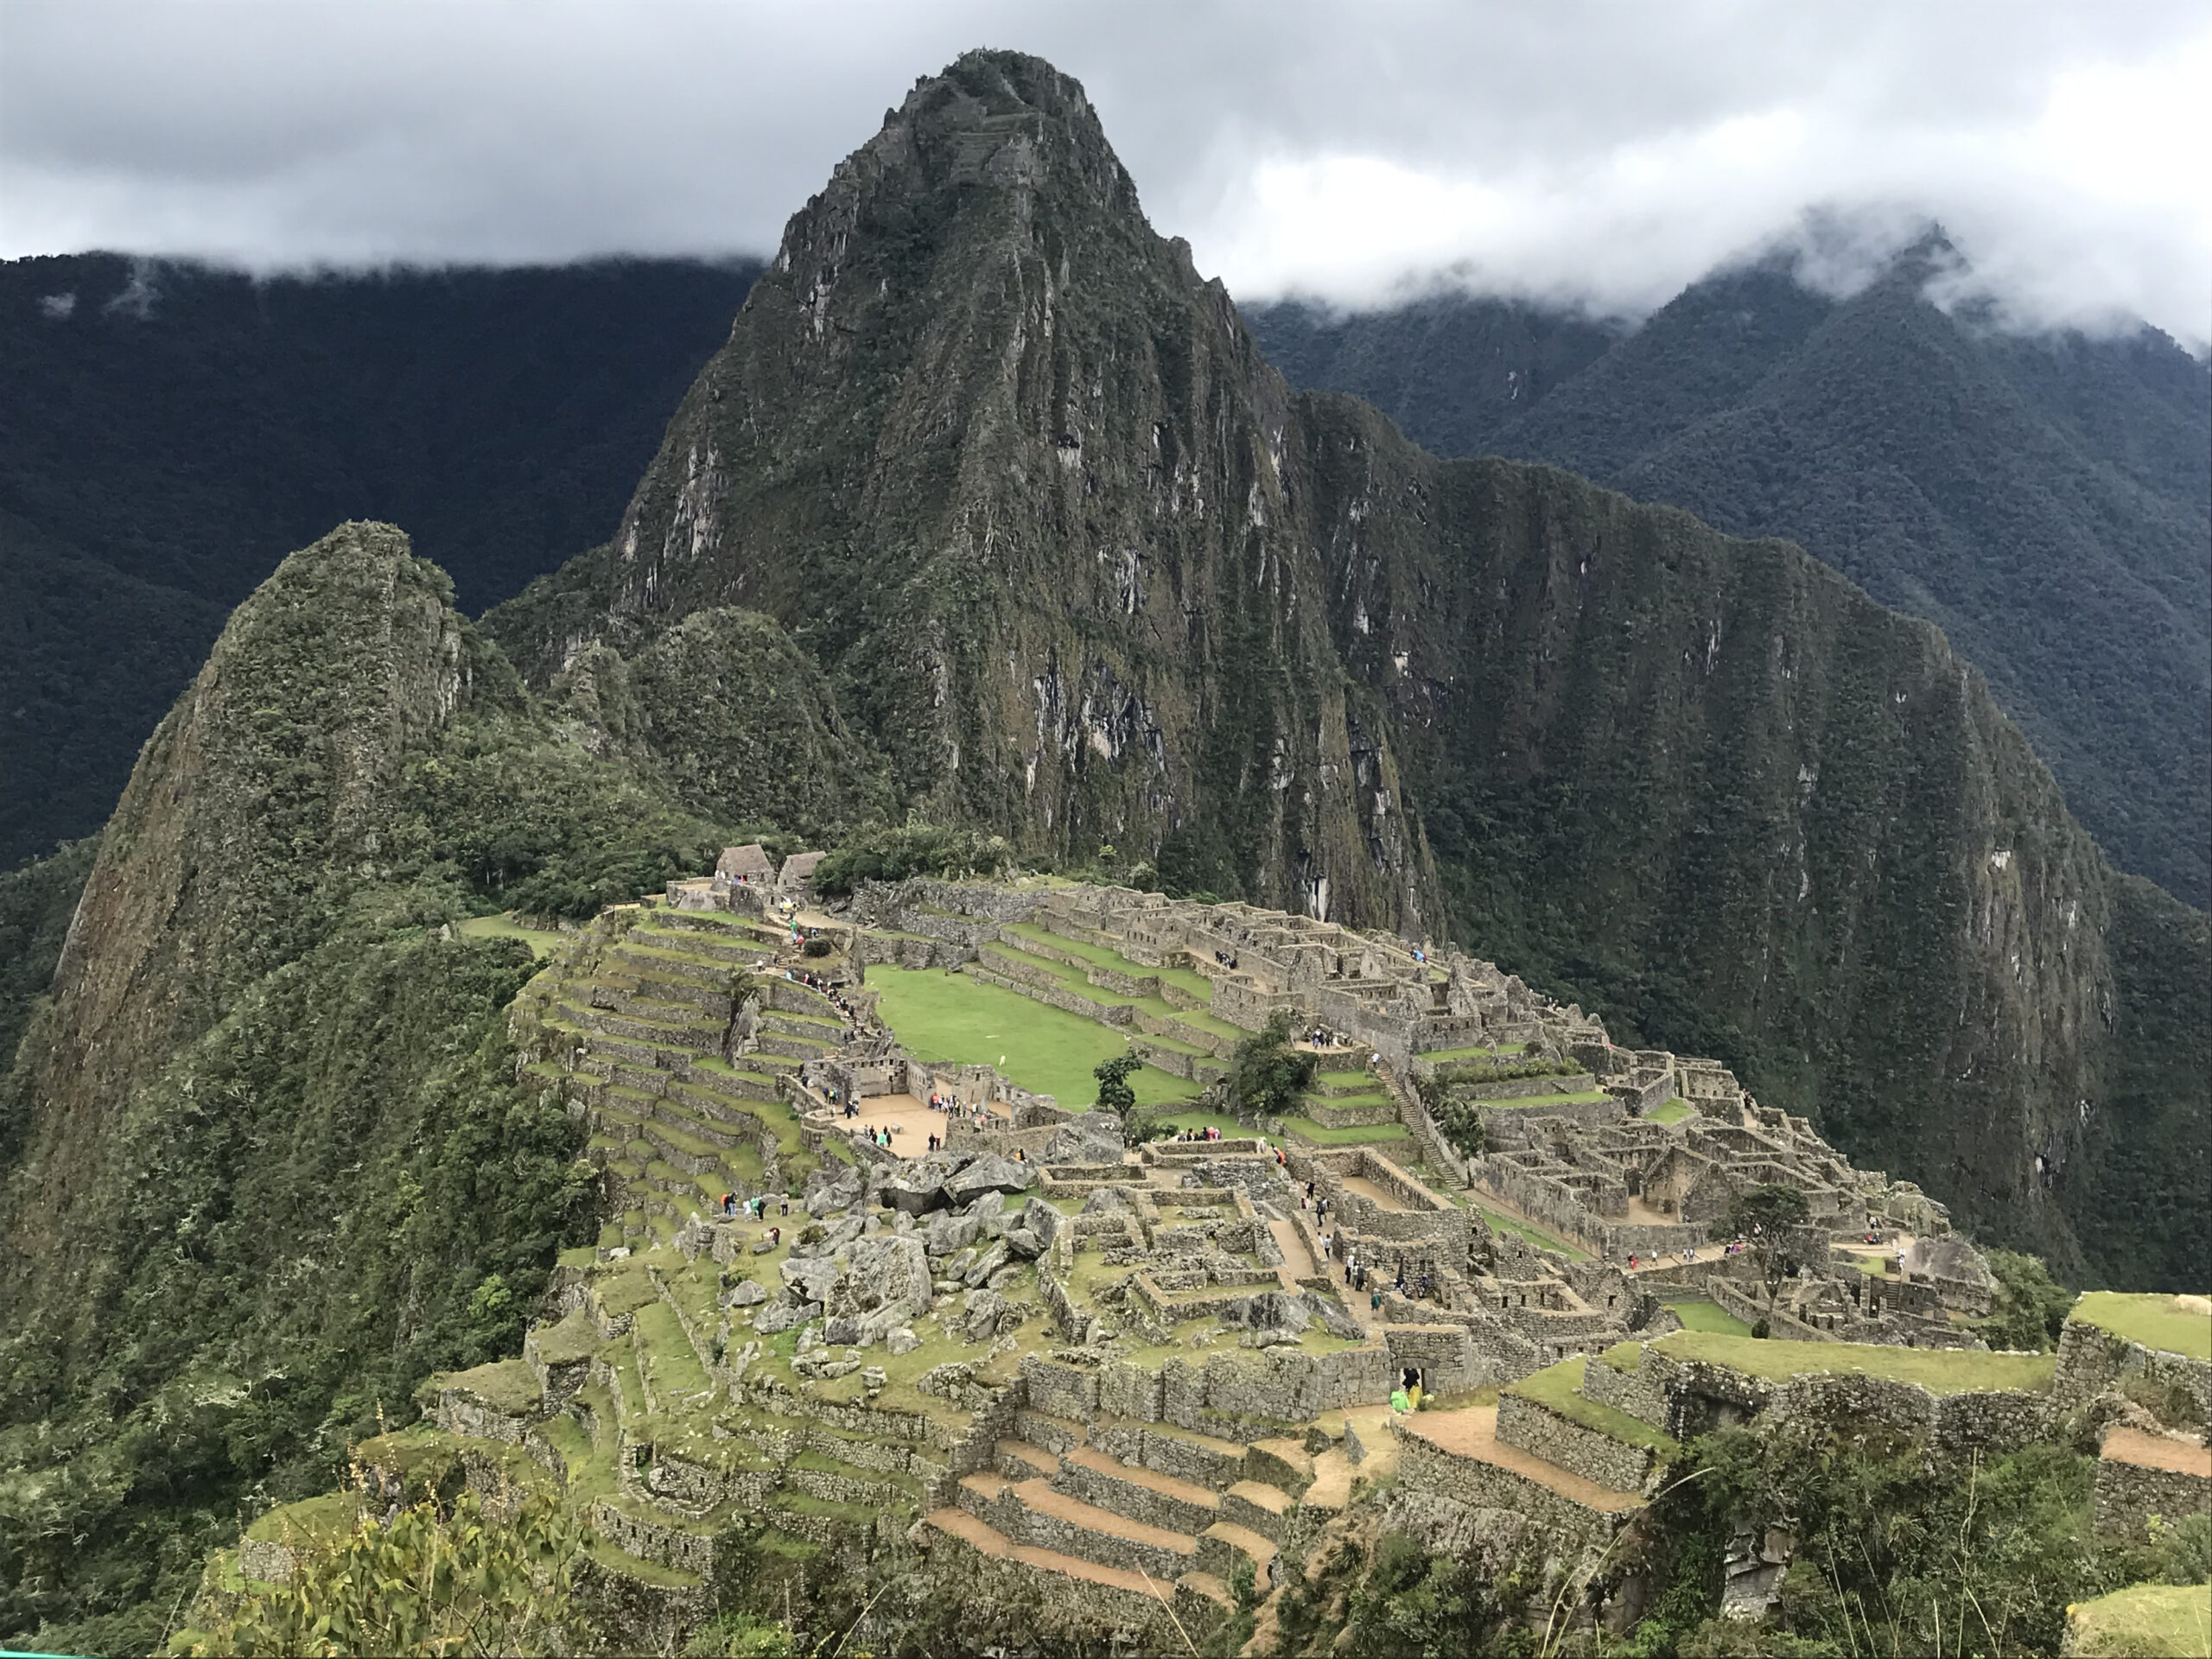 Visiting Machu Picchu: A Guide for Your First Time